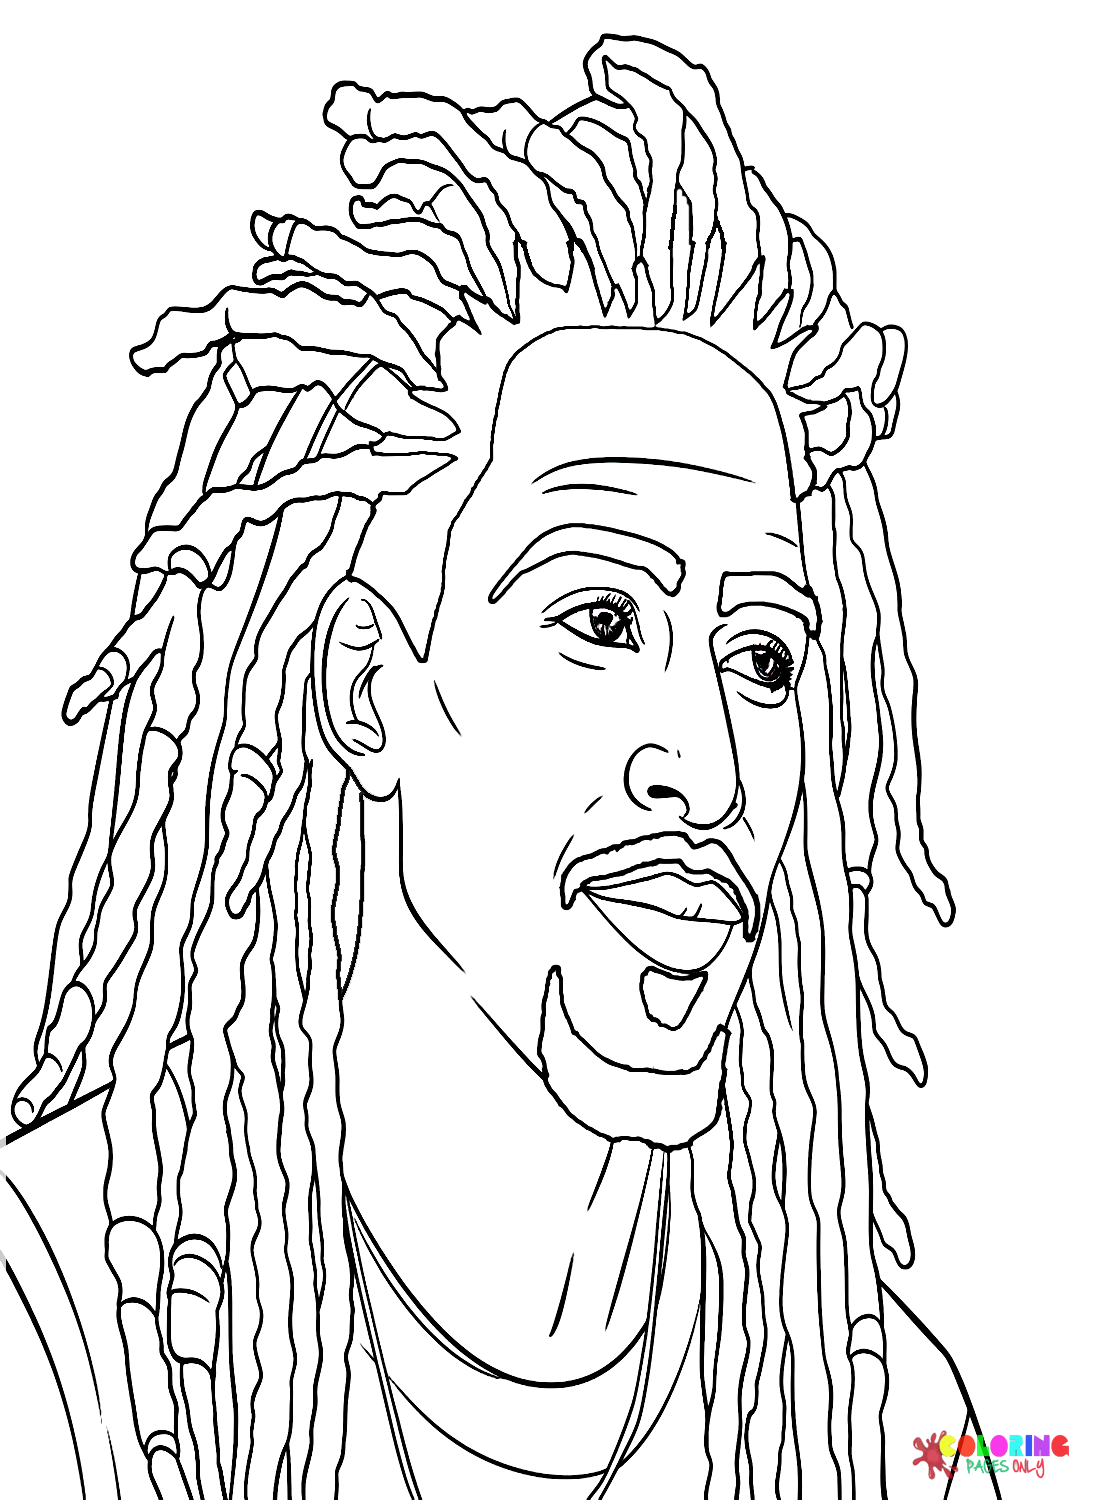 Dreadlock Styles for Men Coloring Page